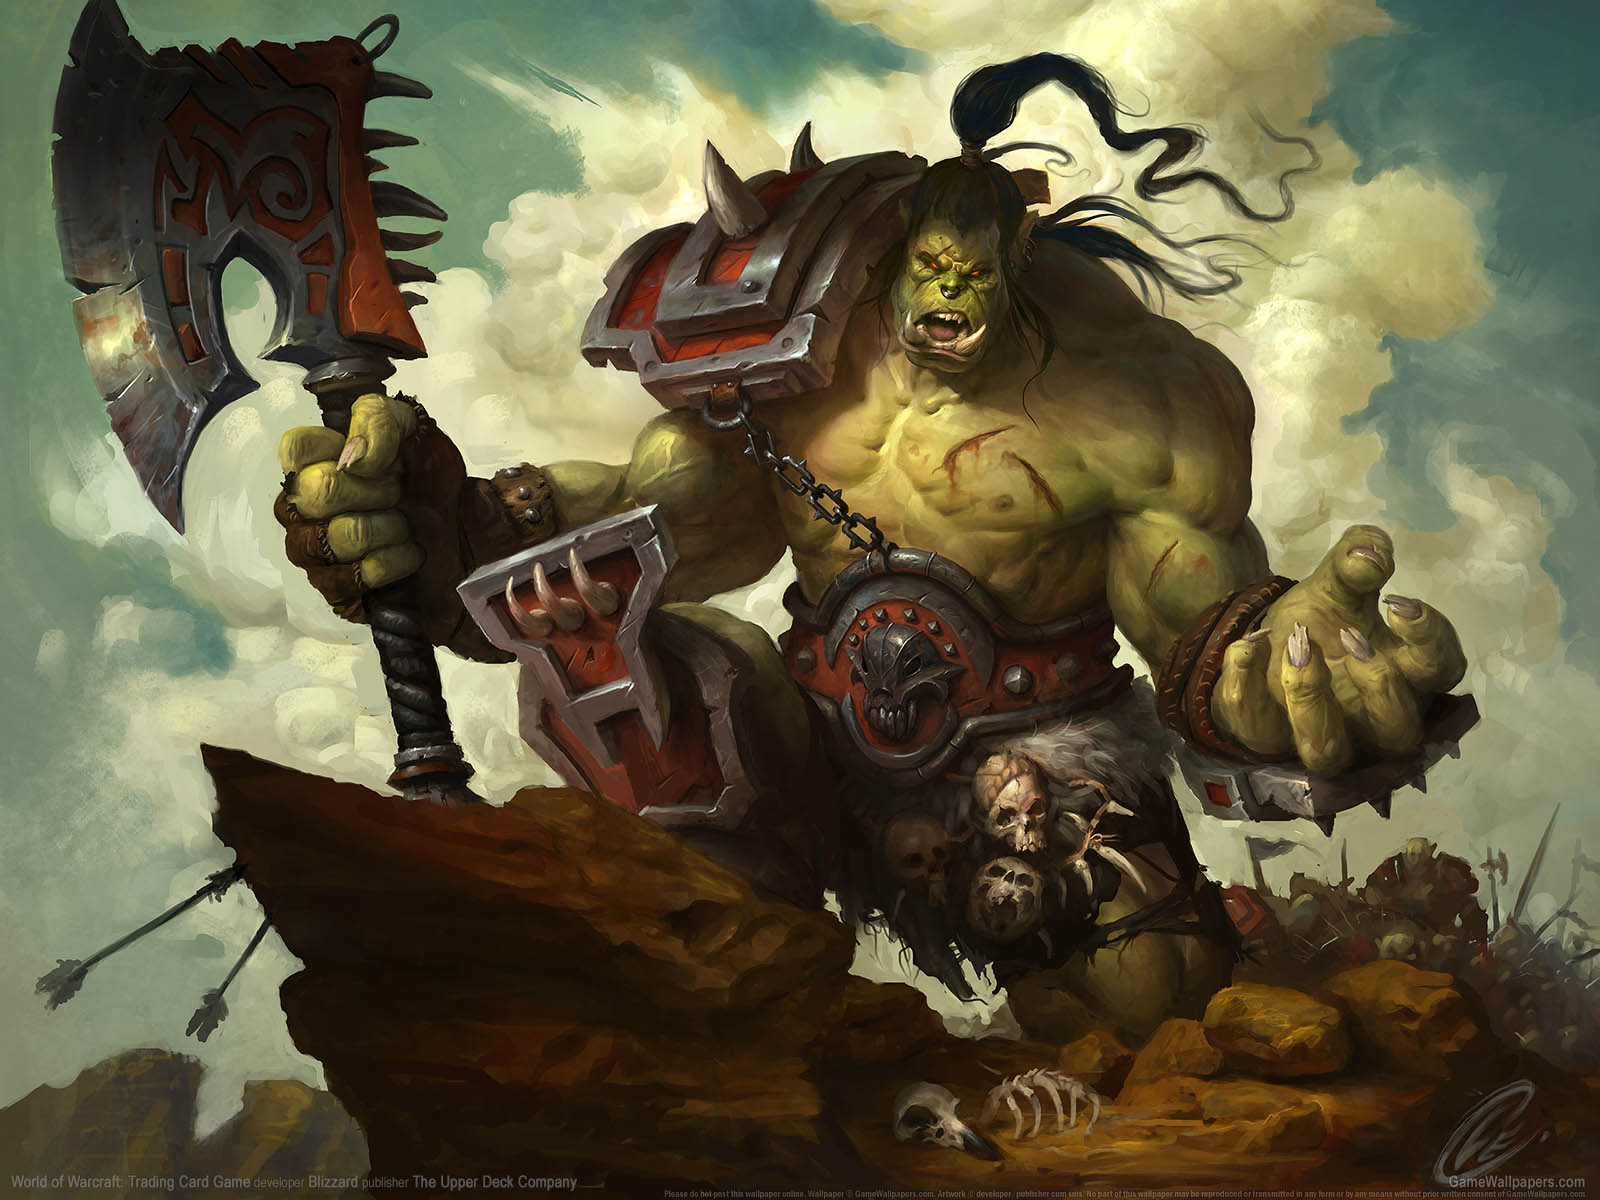 World of Warcraft%3A Trading Card Game wallpaper 60 1600x1200